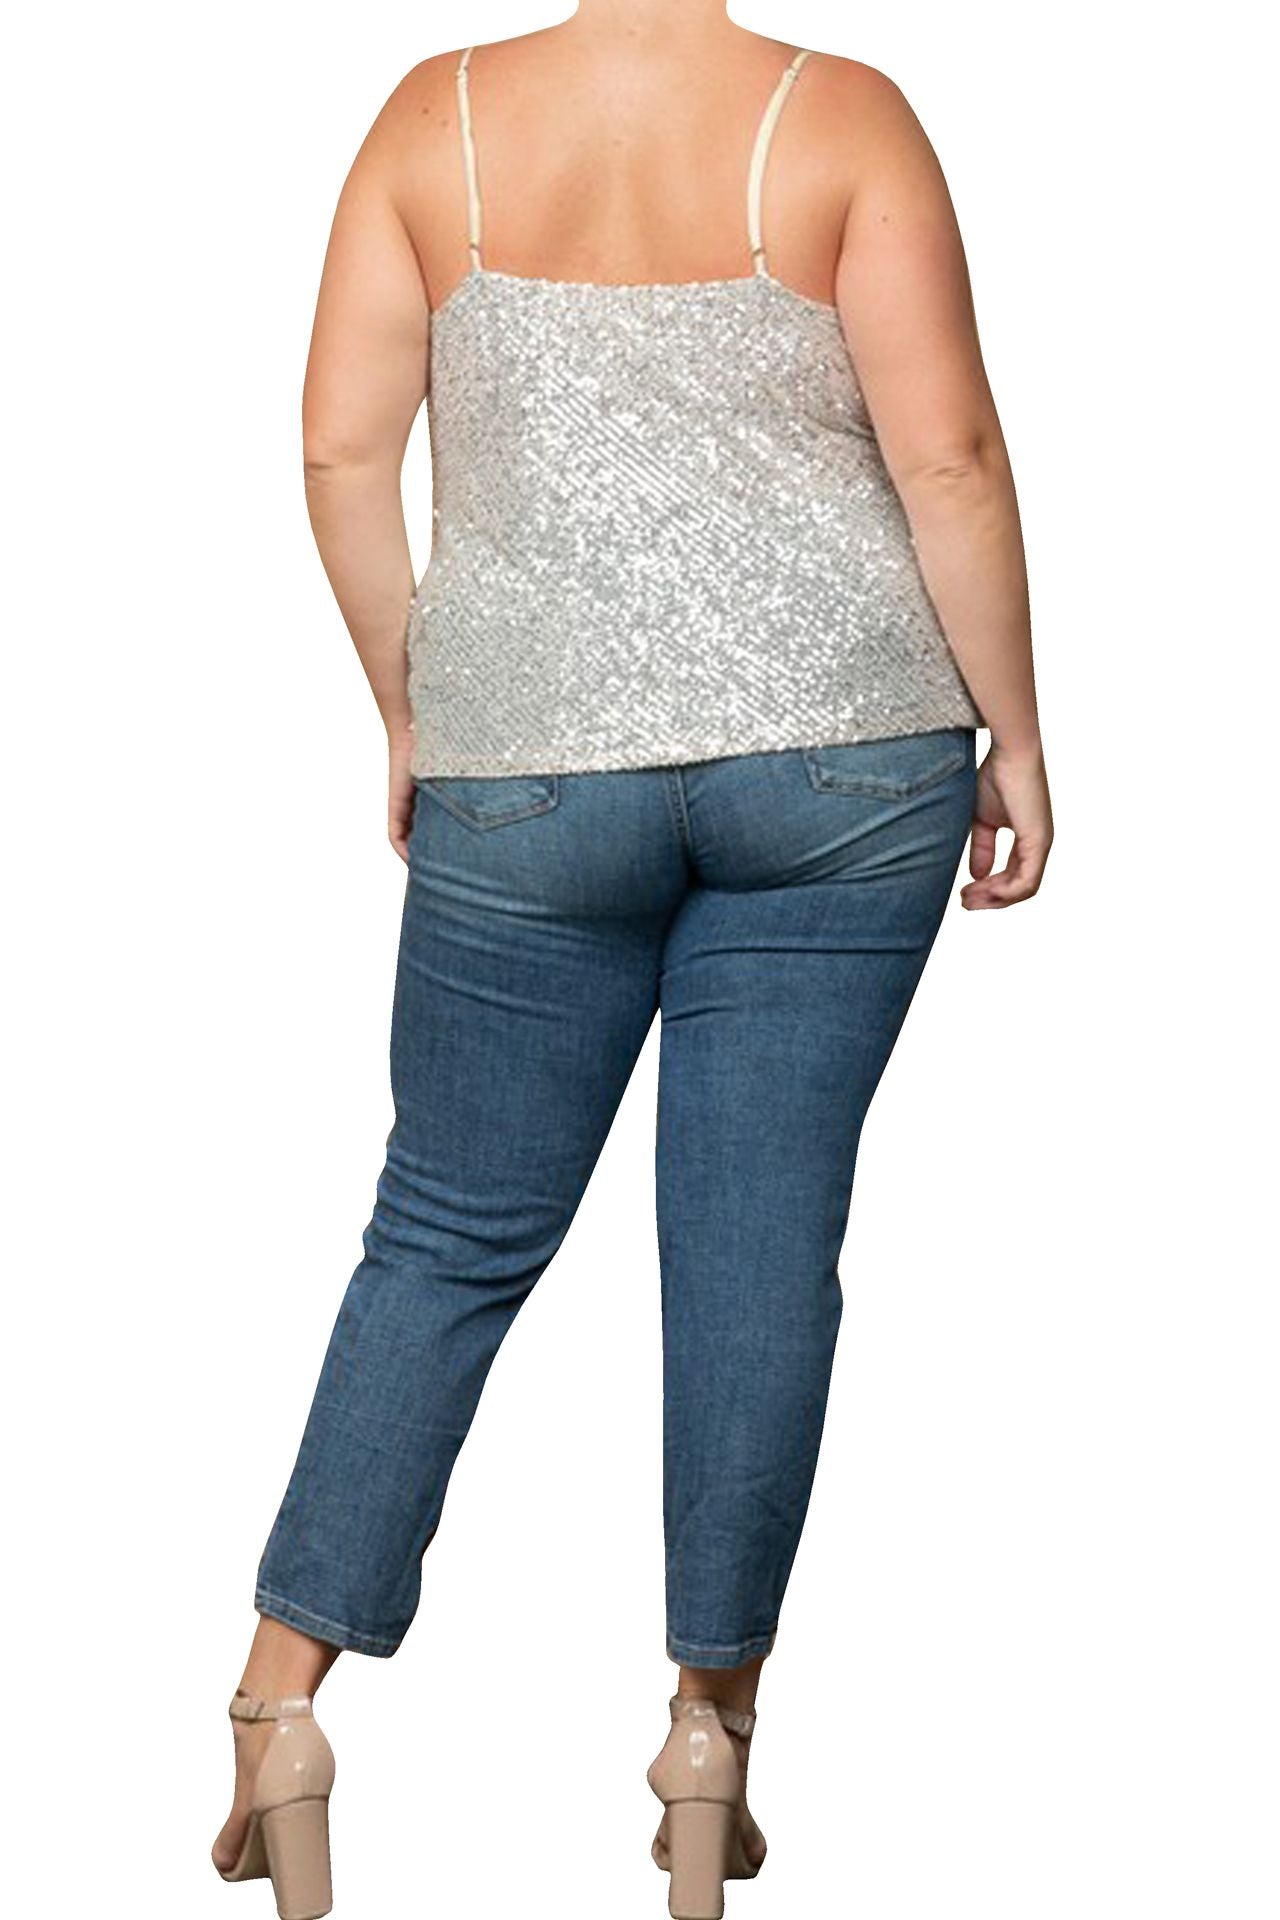 Sparkly Evening Tops Plus Size